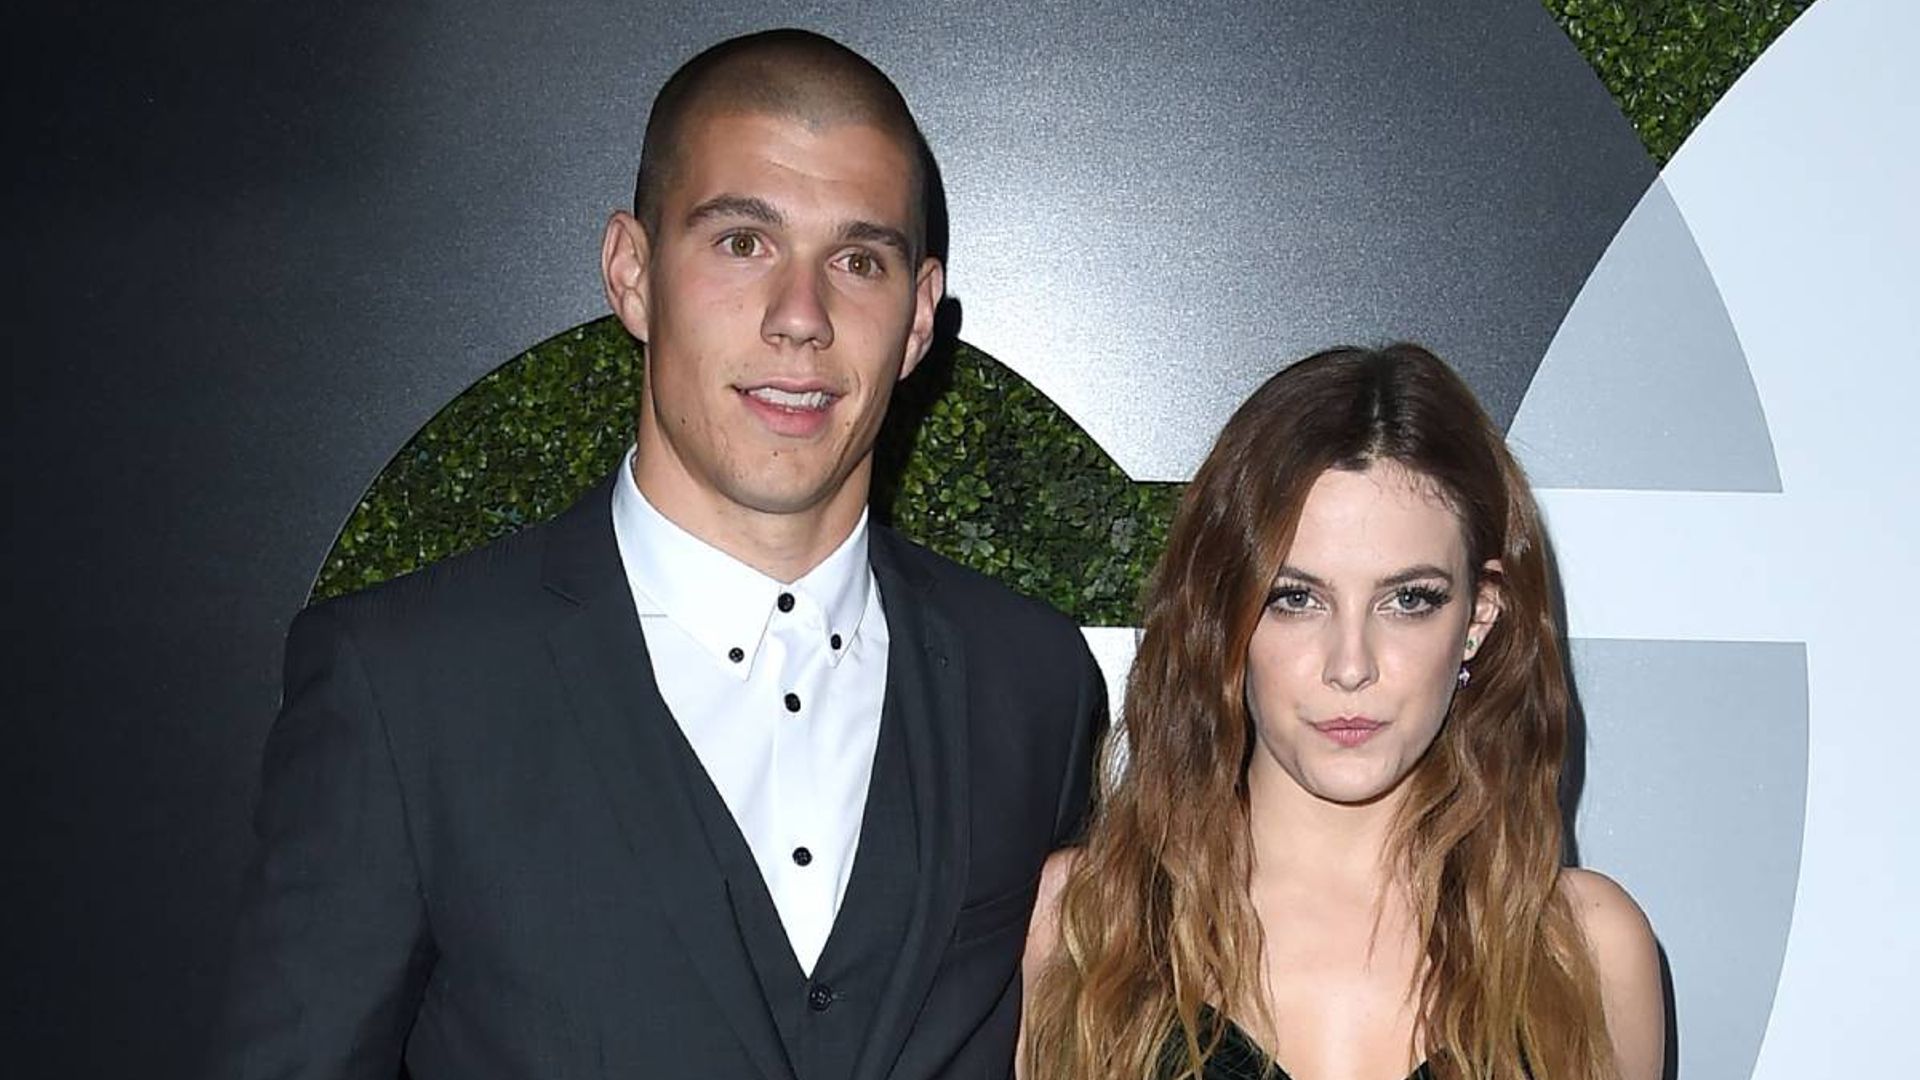 Riley Keough And Ben Smith-Petersen's Relationship, In Their Own Words